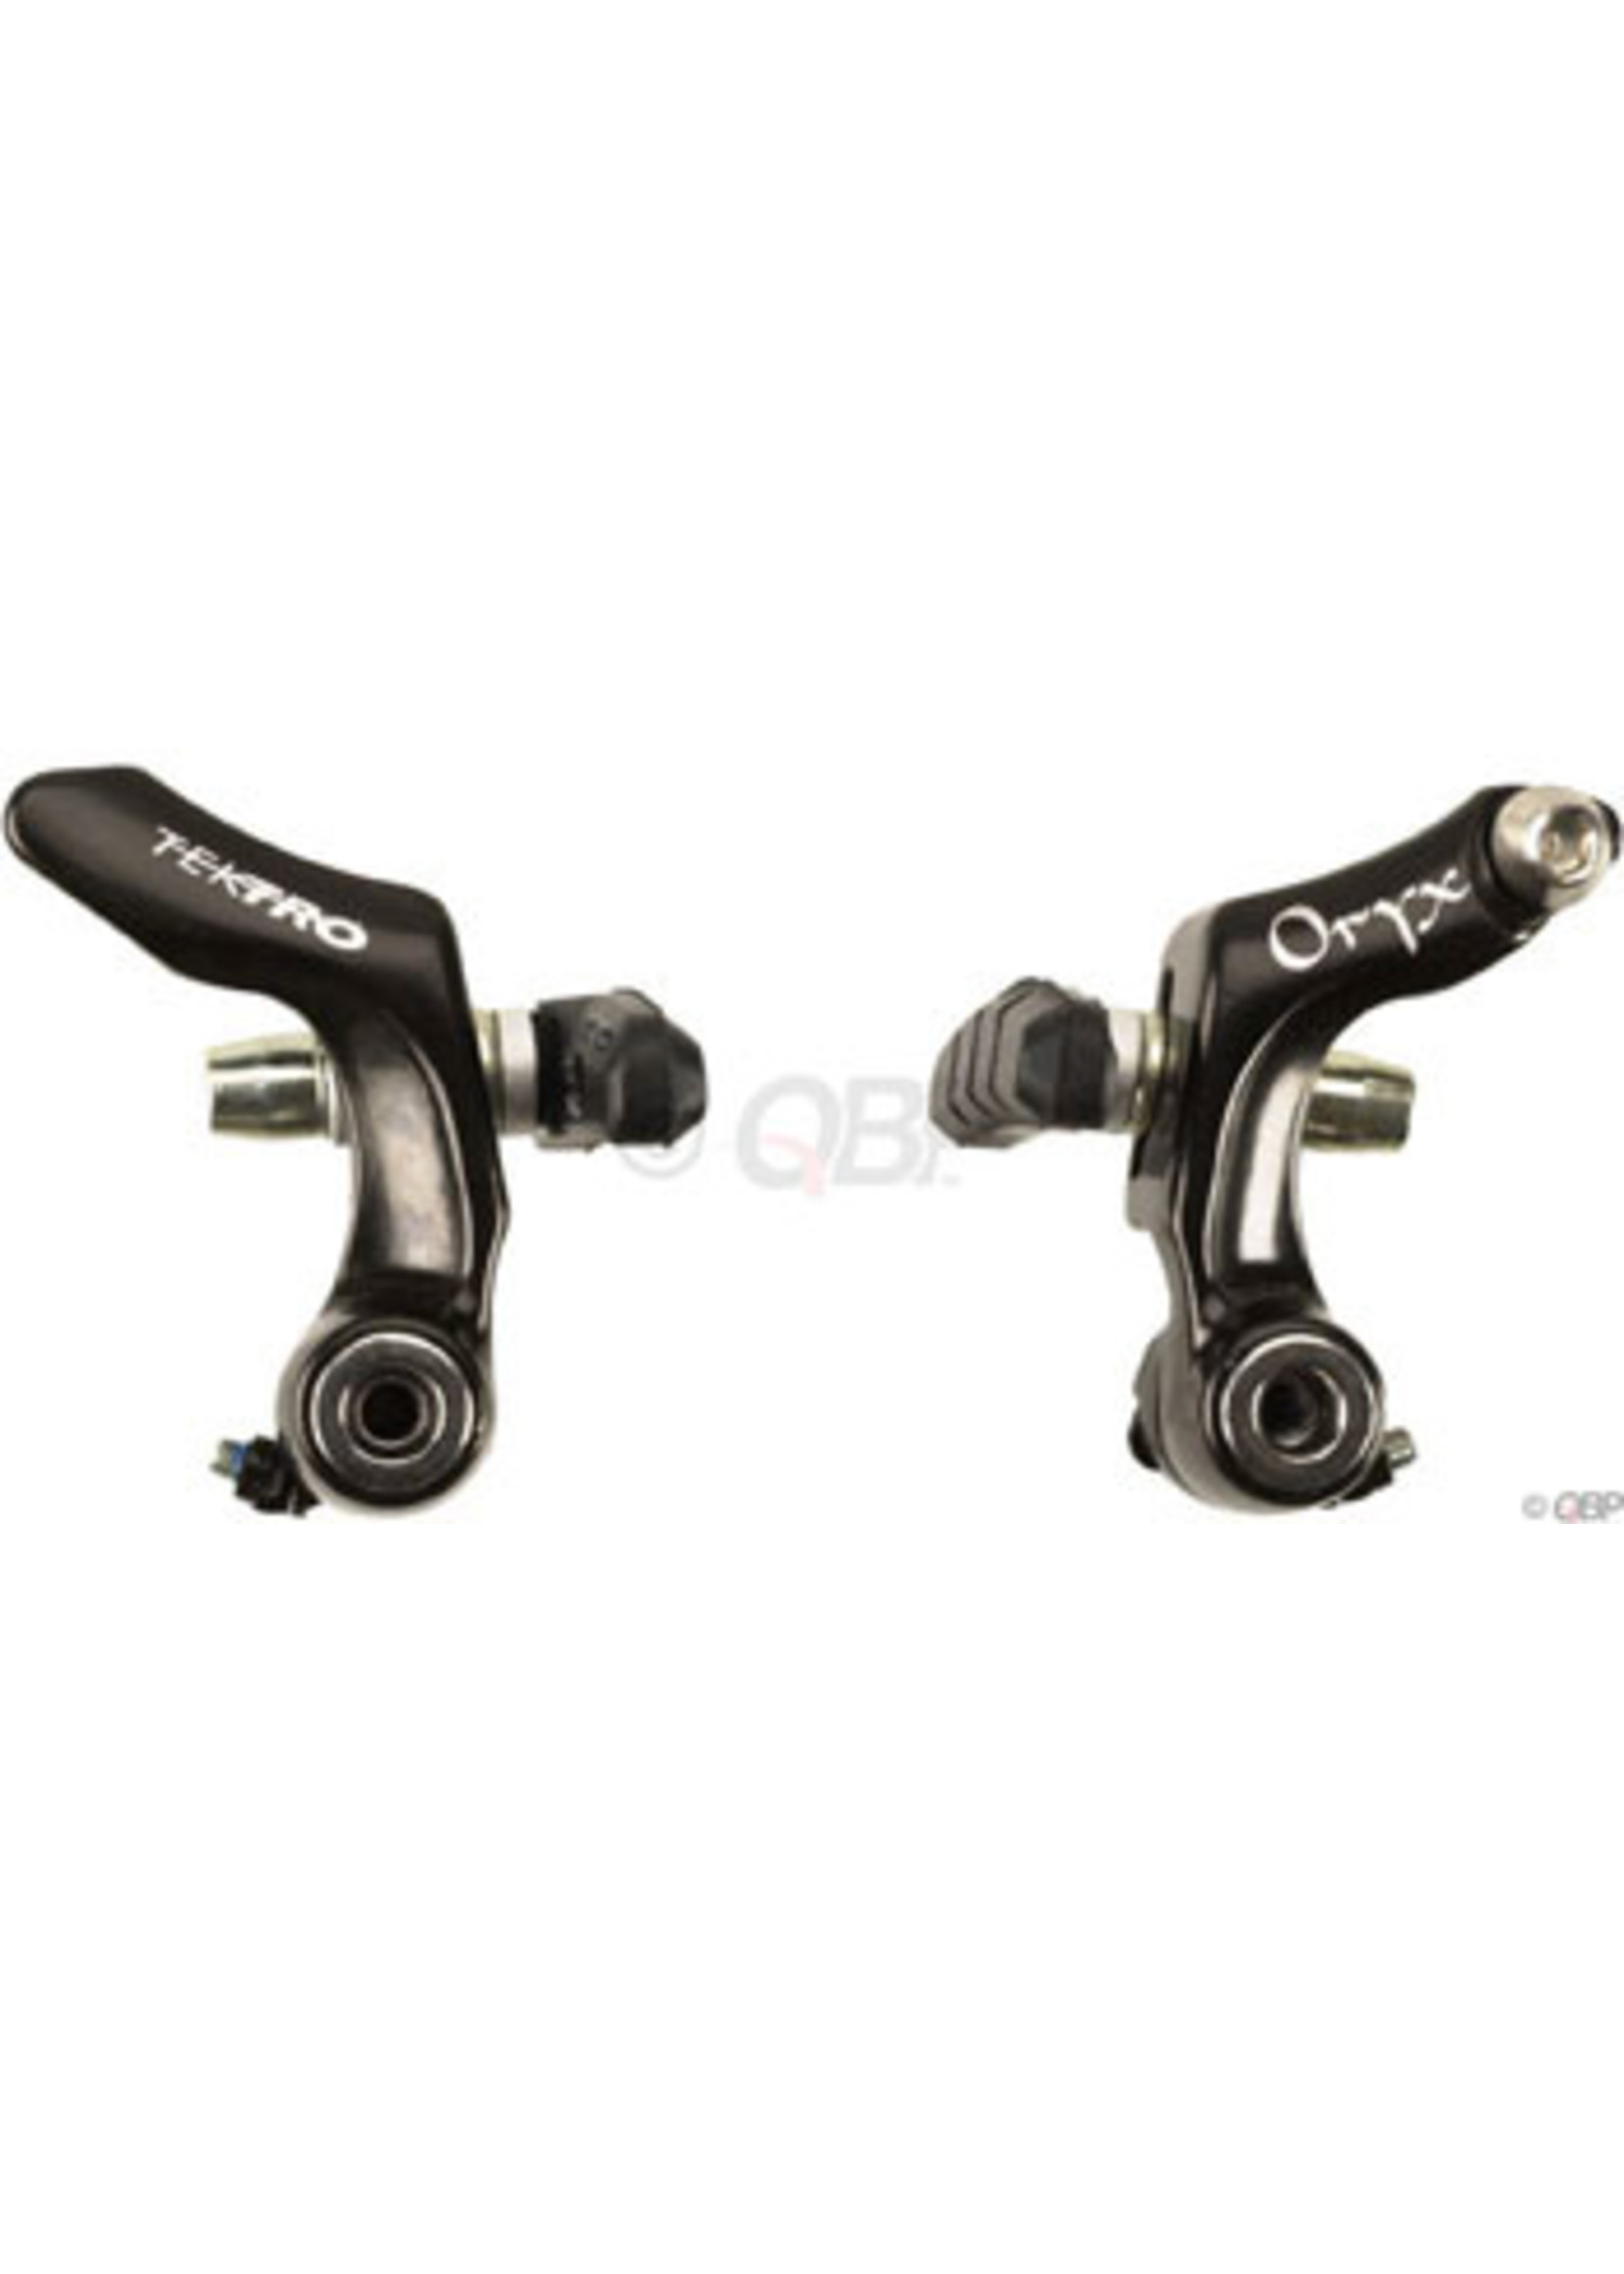 Tektro Oryx Front or Rear Cantilever Brake with Standard Pad, Black